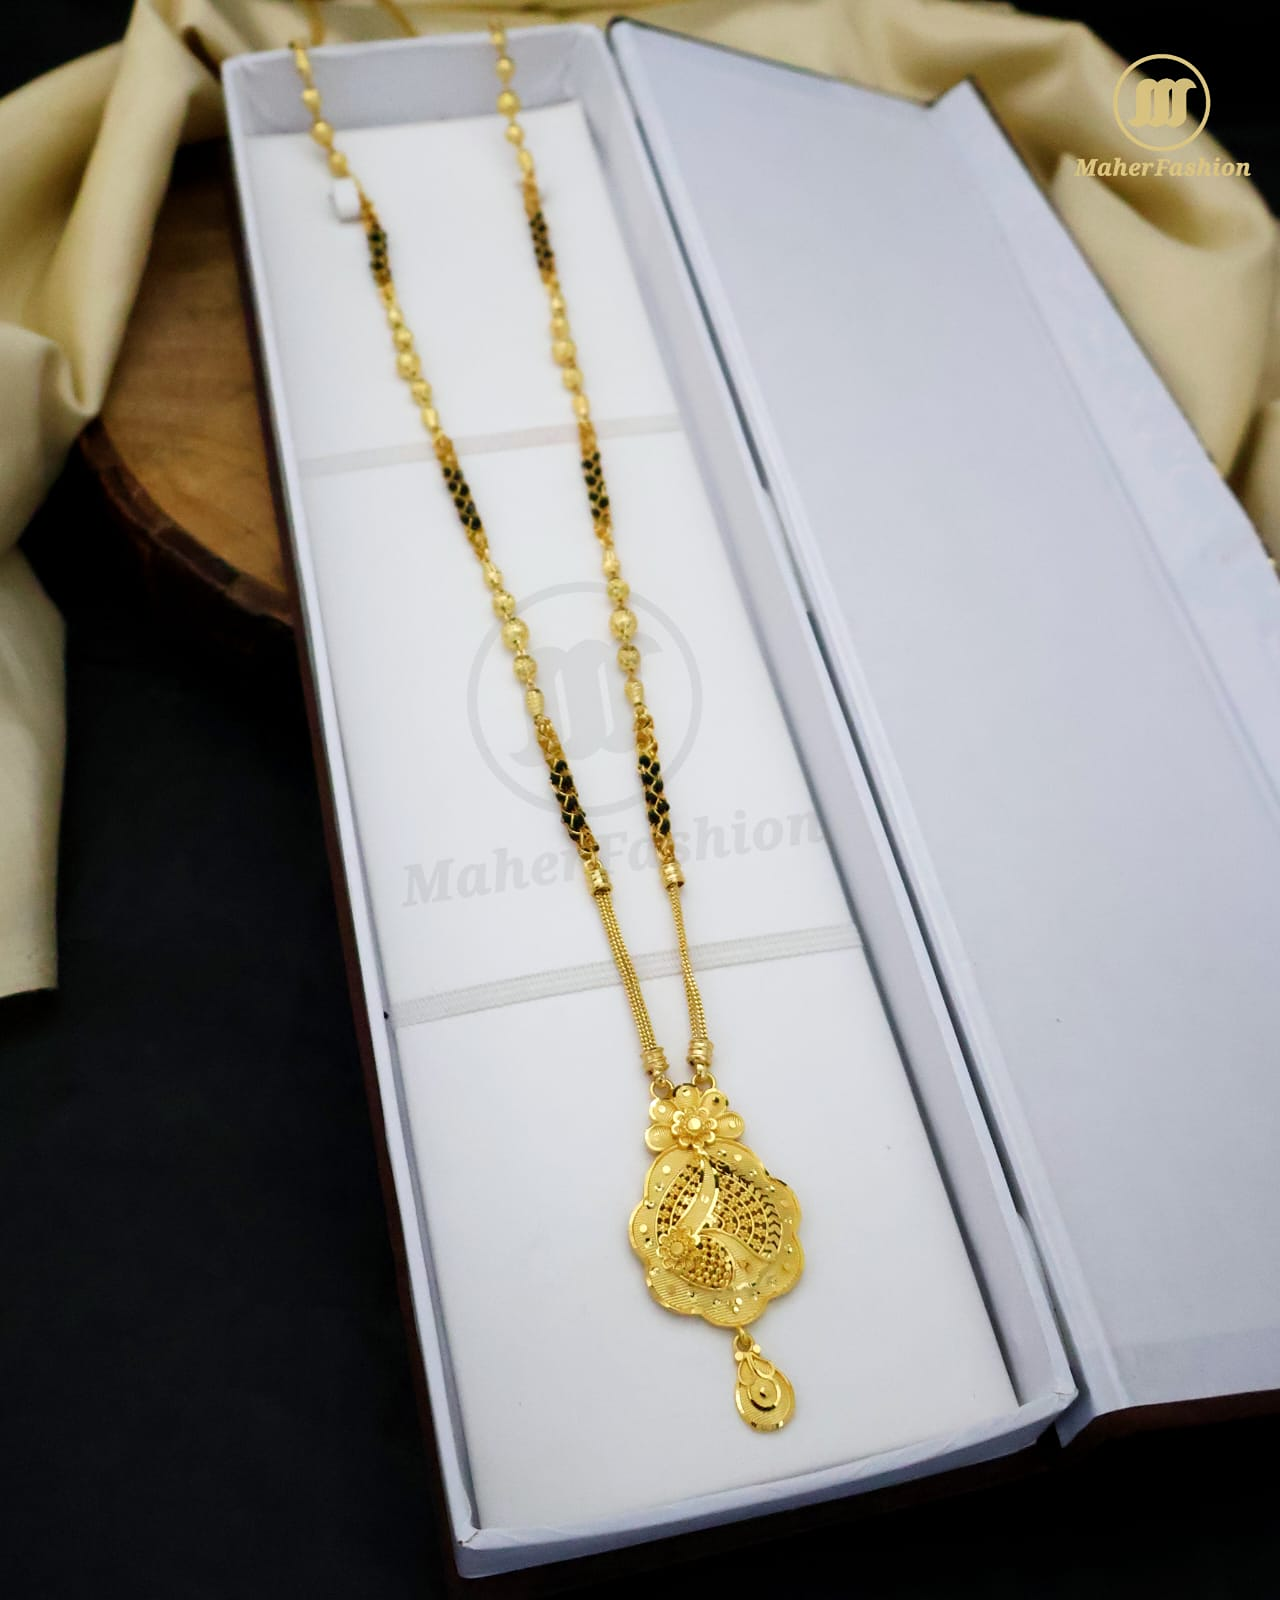 ADORABLE GOLD PLATED MANGALSUTRA